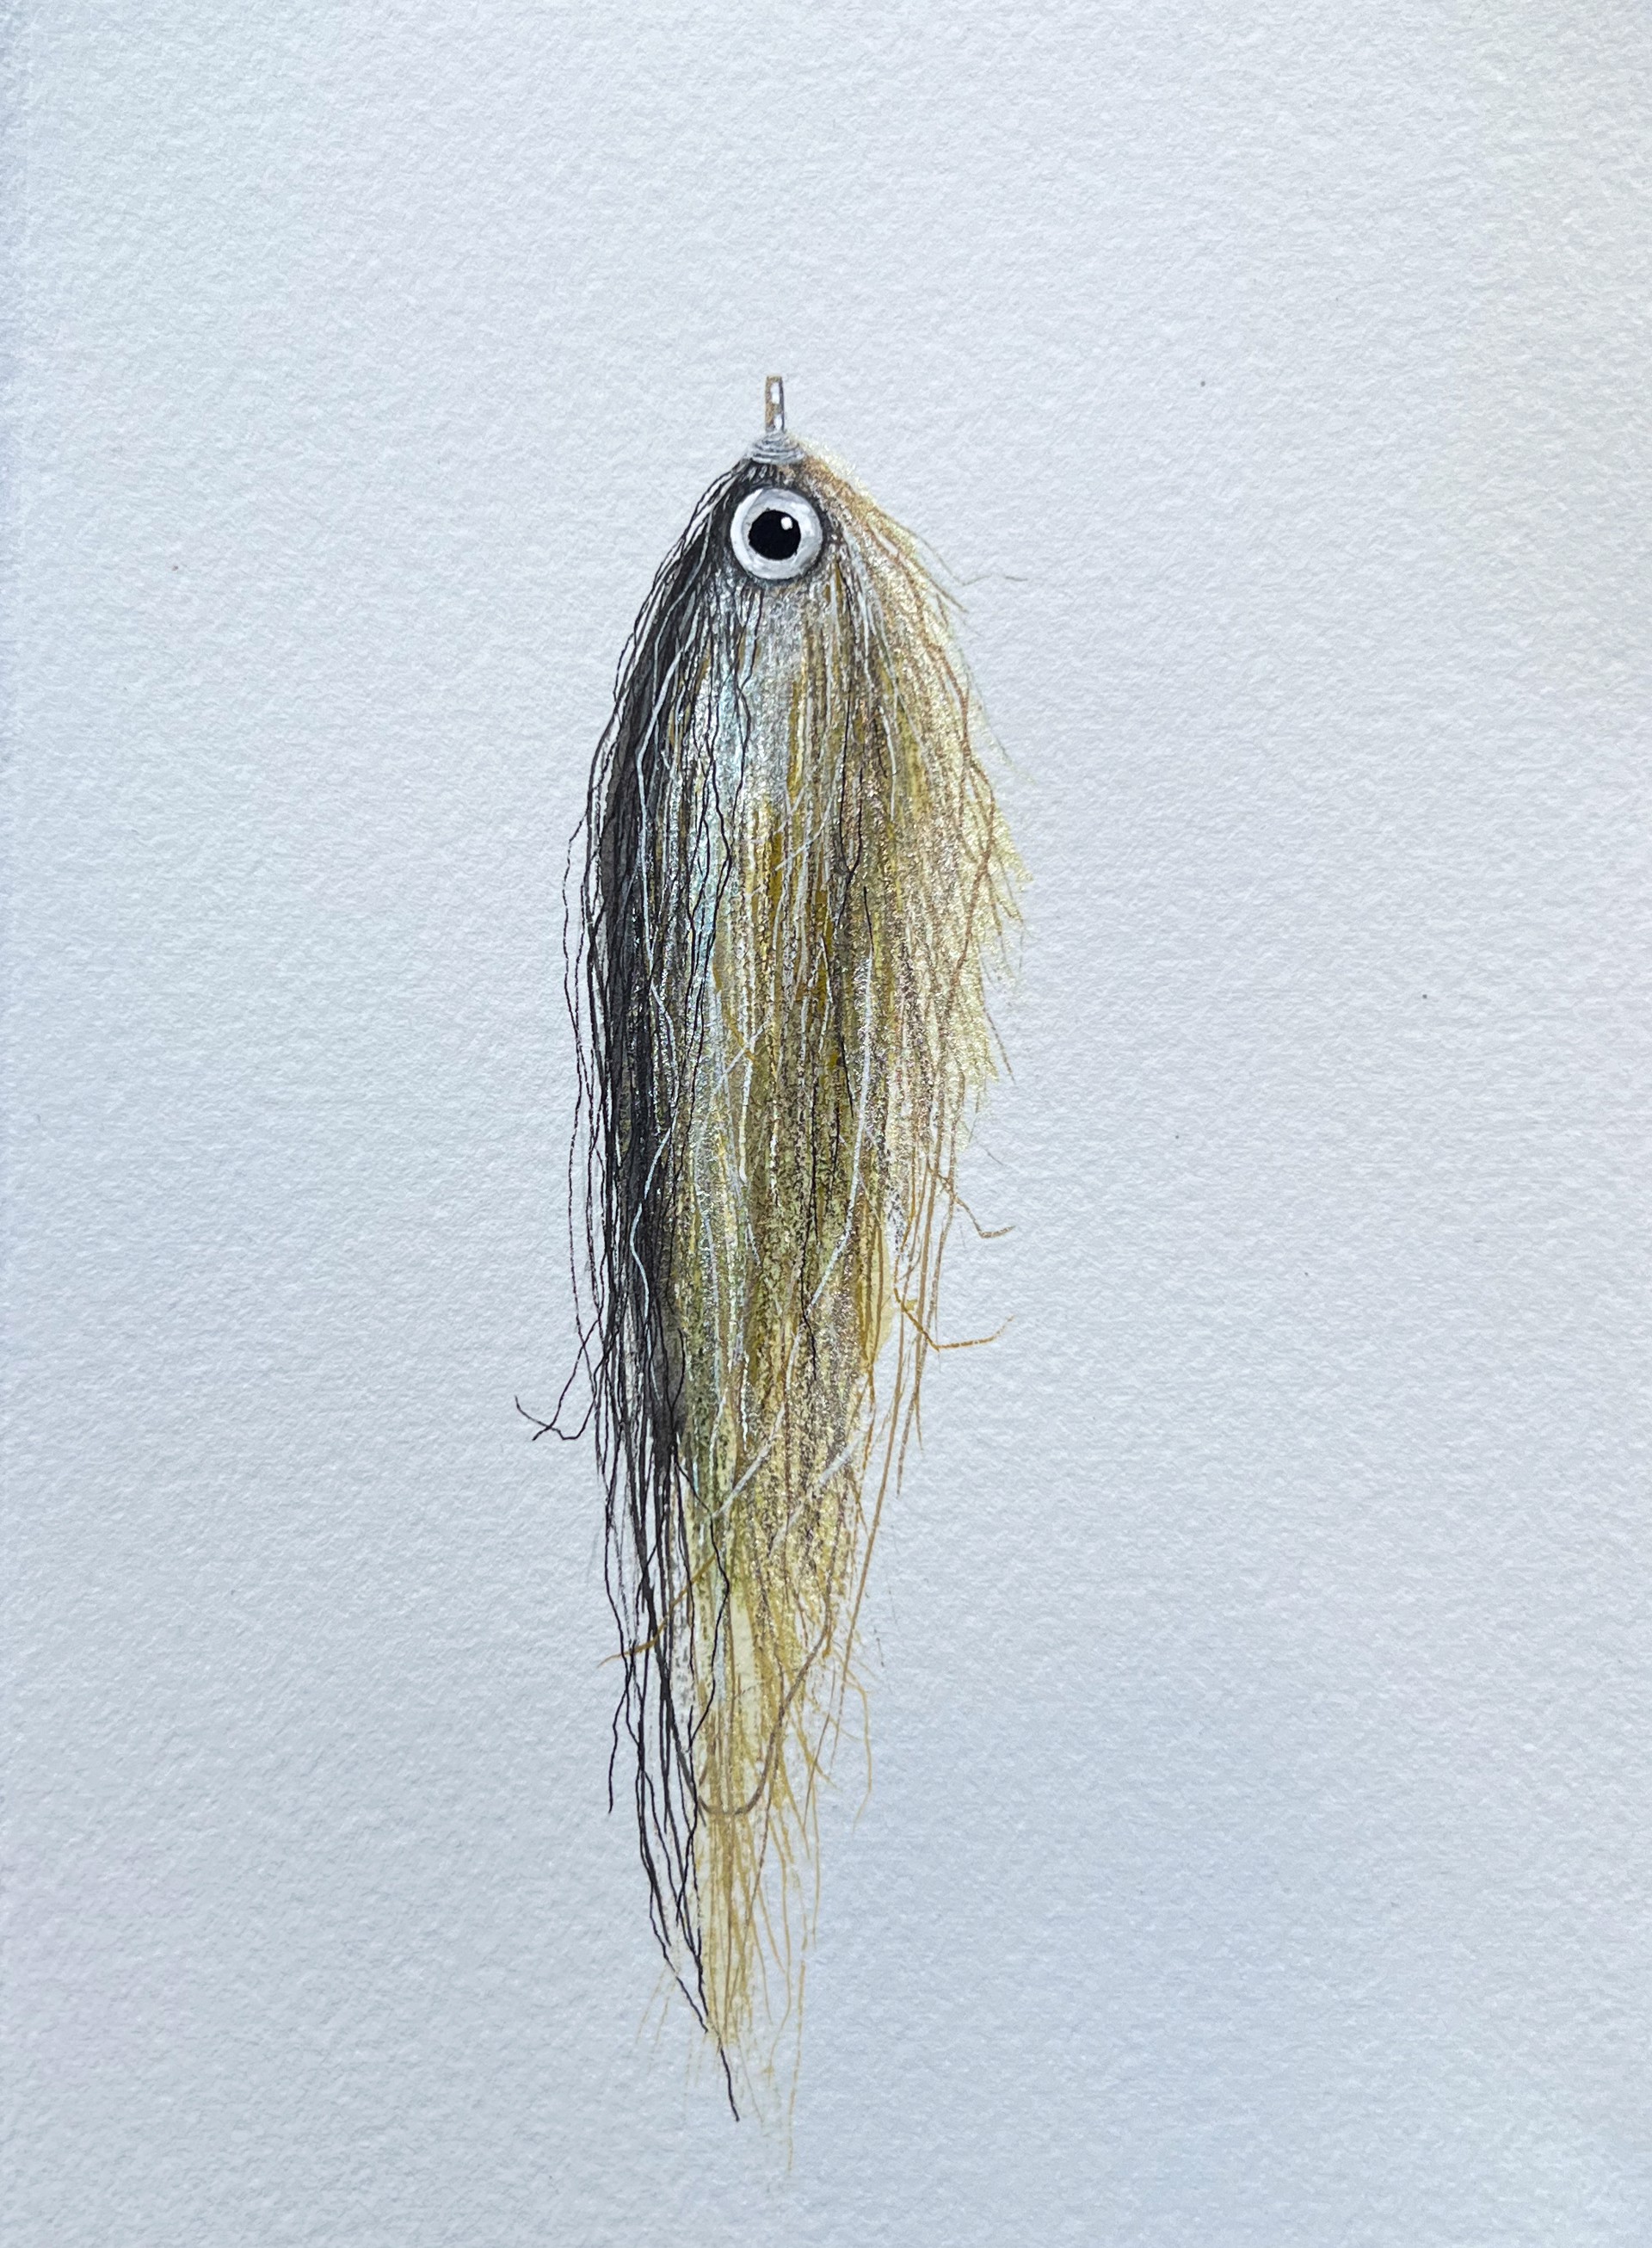 Turpin Messy Minnow by Meredith Mejerle